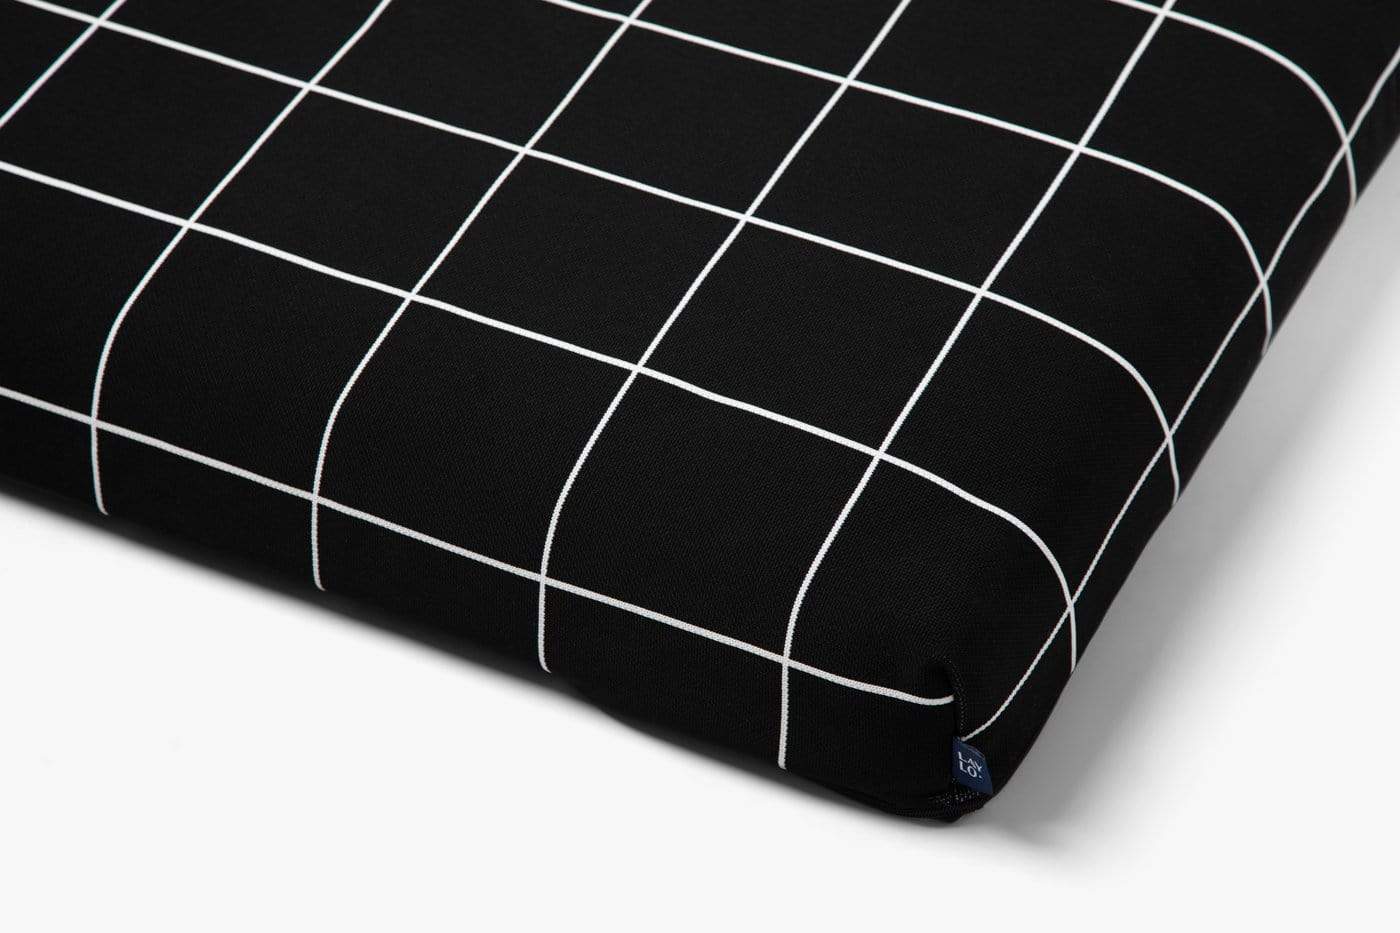 Laylo Pets Grid LAY LO Pets - Black Grid Dog Bed or Bed Cover Lay Lo Pets